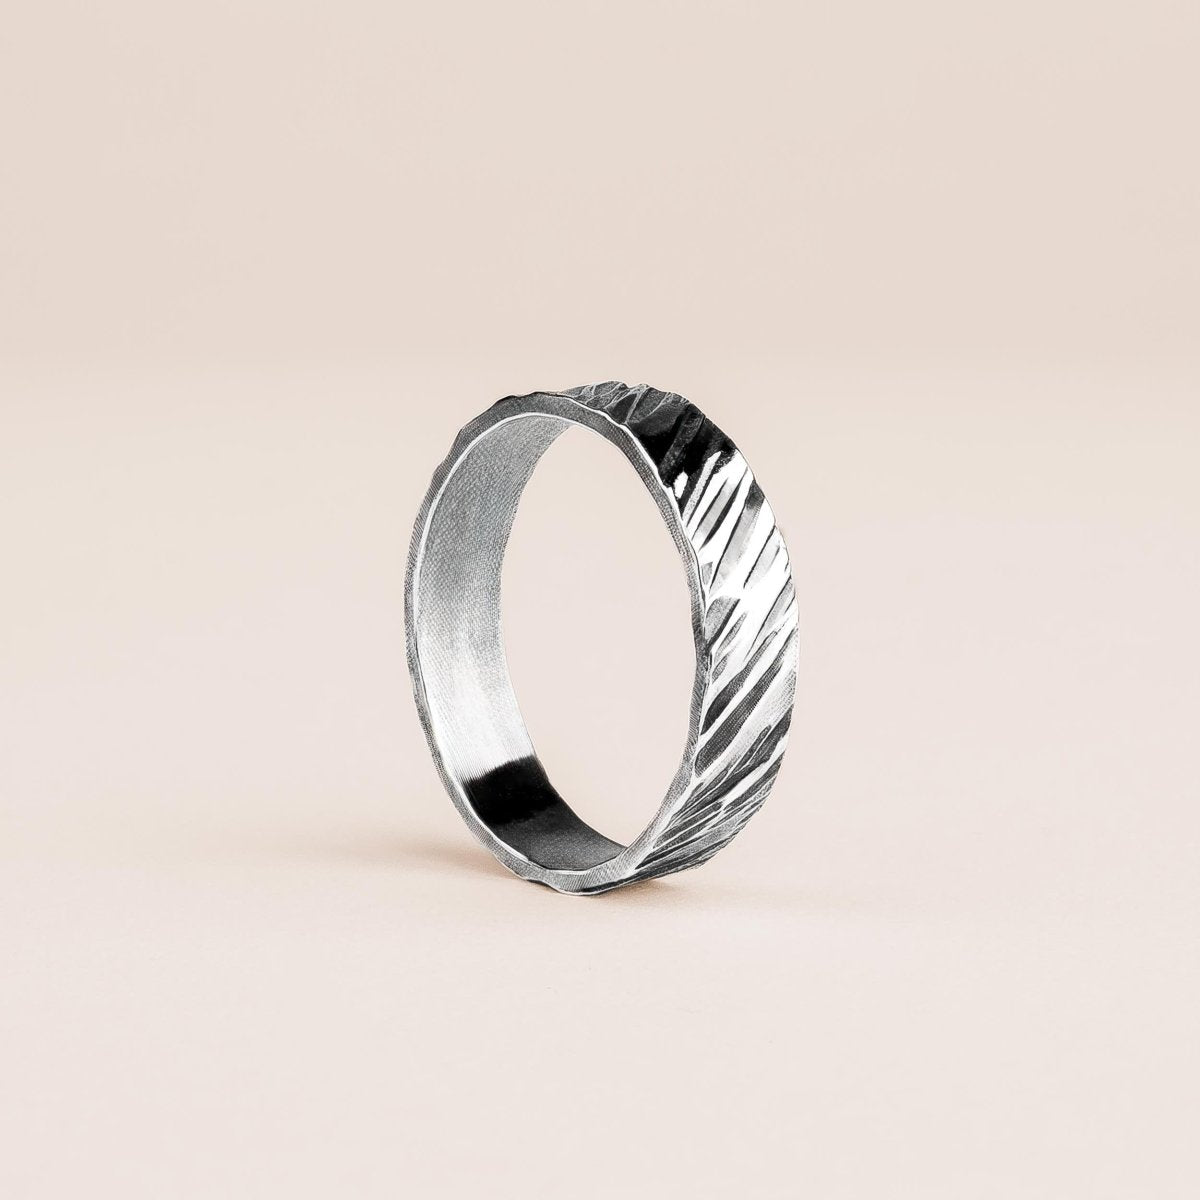 Dune Ring - Melanie Golden Jewelry - _badge_new, for the groom, mens jewelry, new, ring bands, rings, wedding, wedding shop